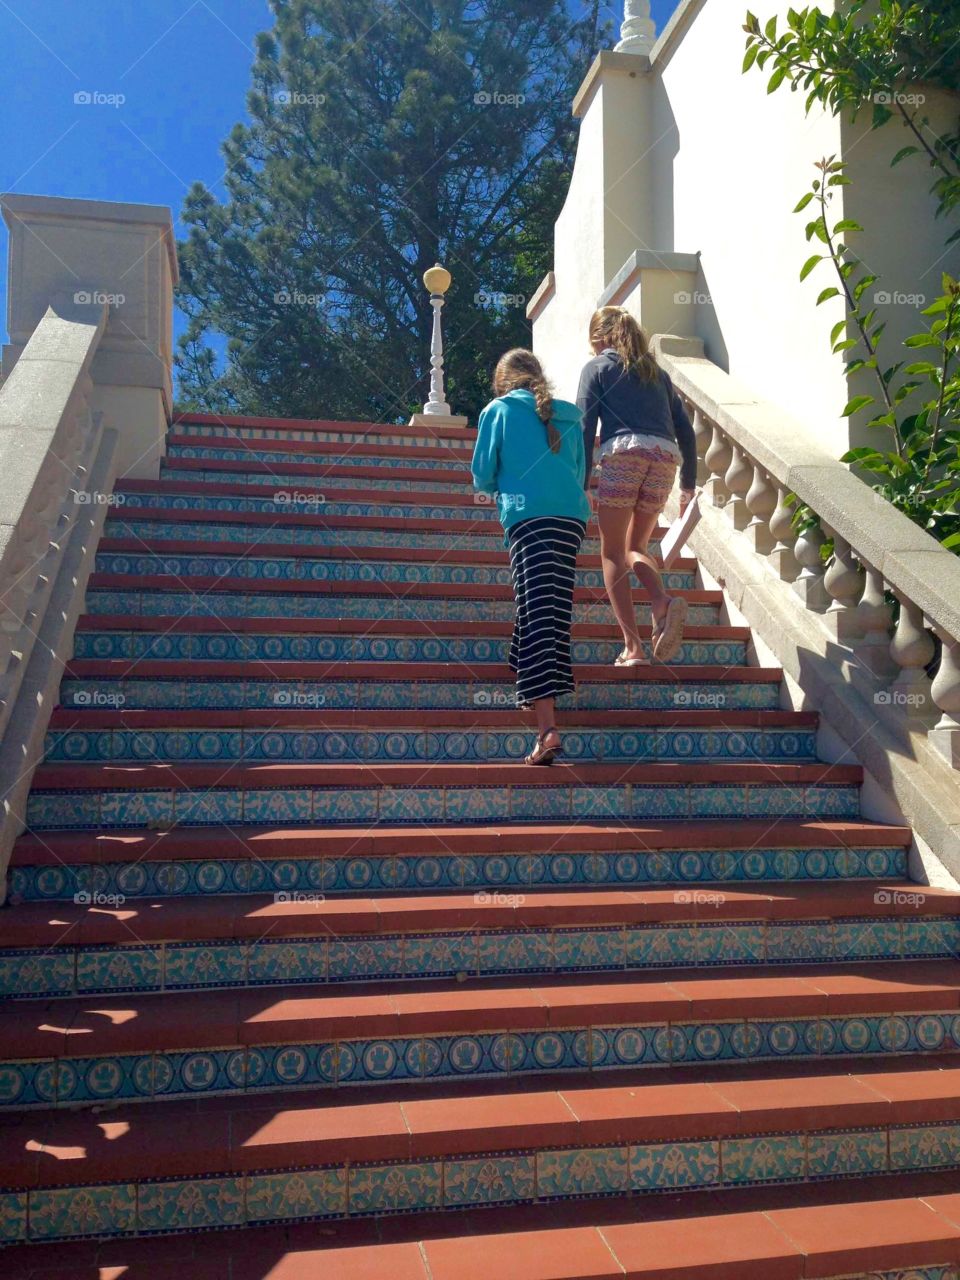 Two girls on a stairway. Two girls climbing an outdoor stairway at Hearst Castle in San Simeon, California.
